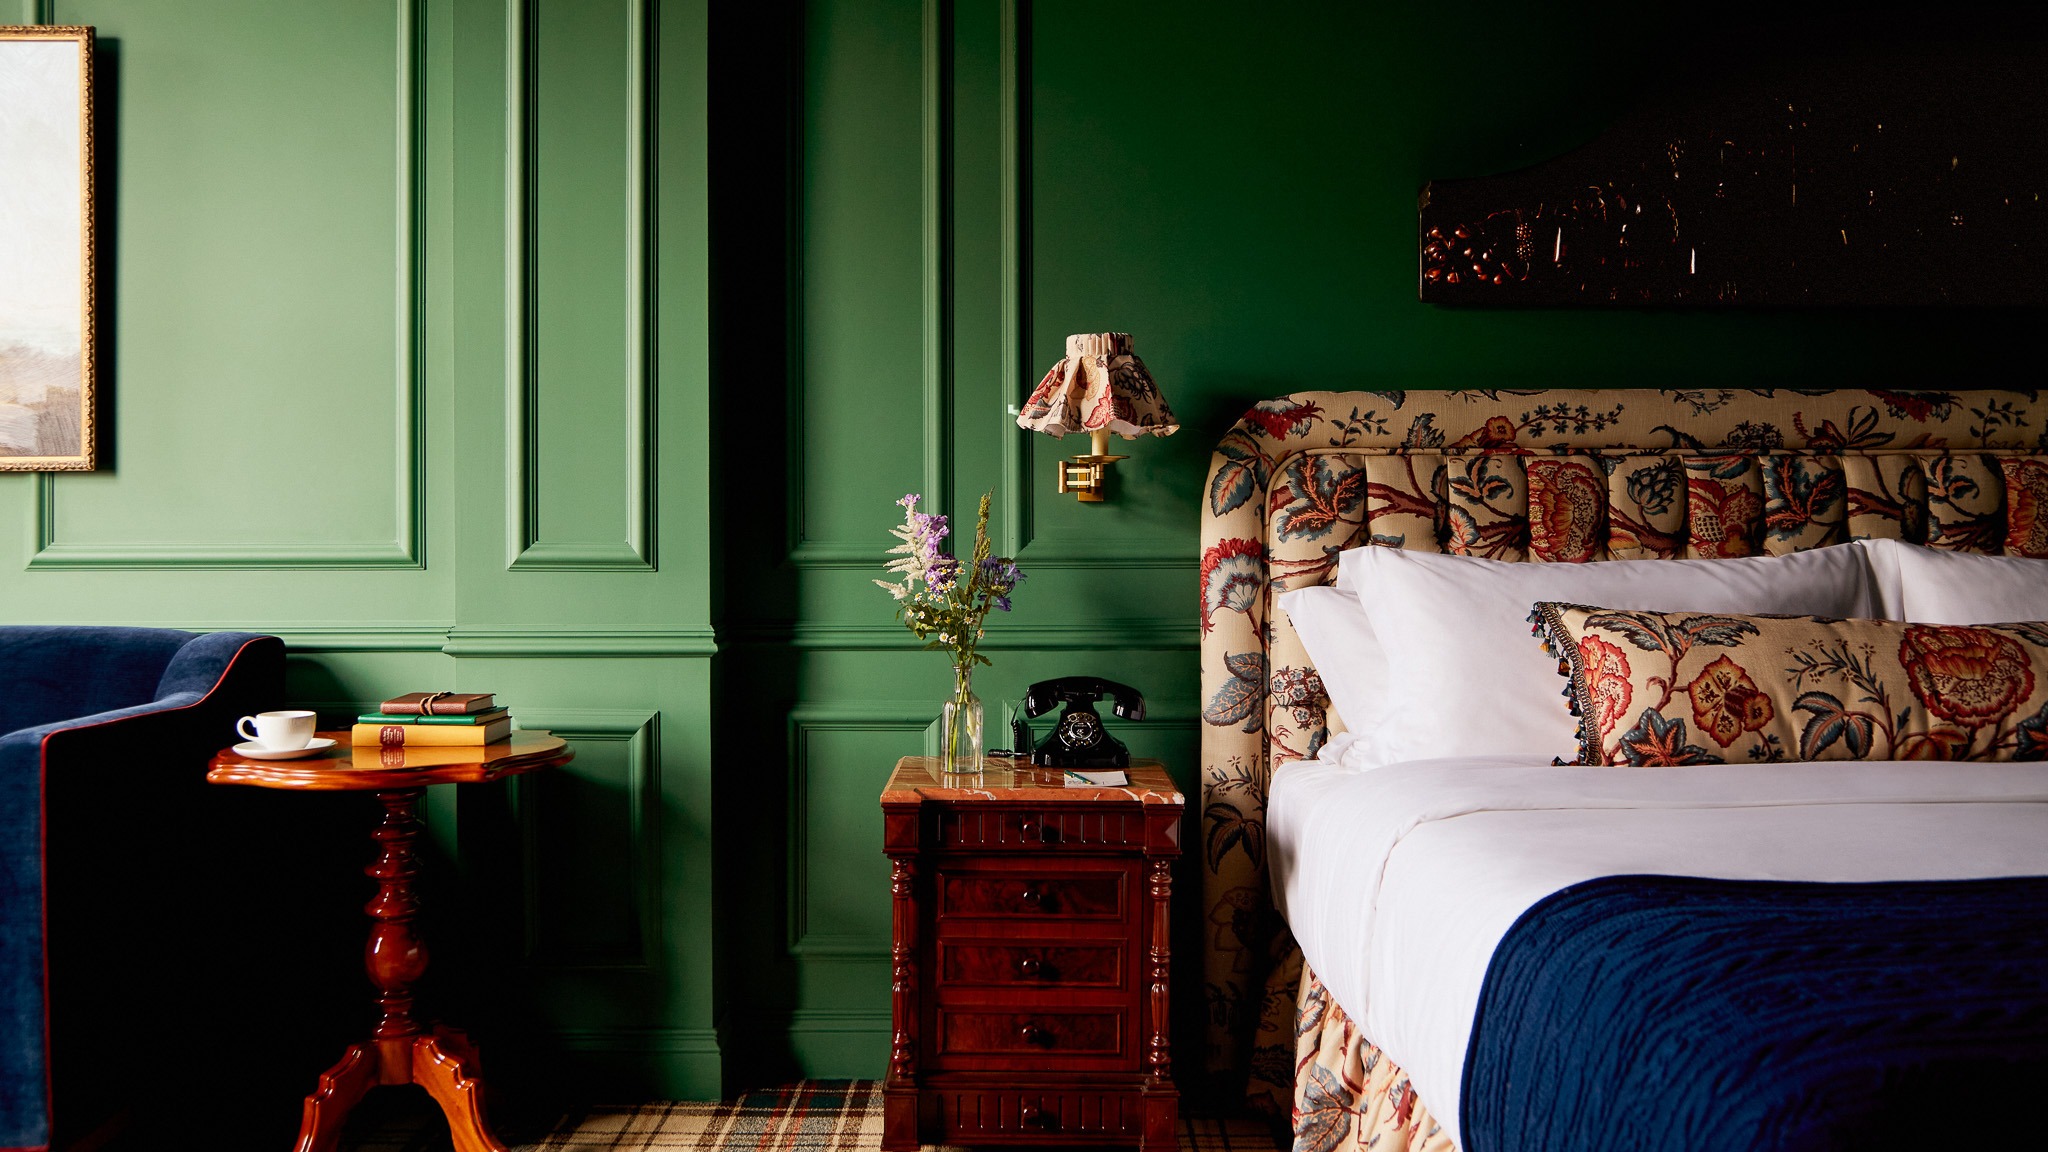 A new and renovated guest room at Slieve Donard with green paneled walls